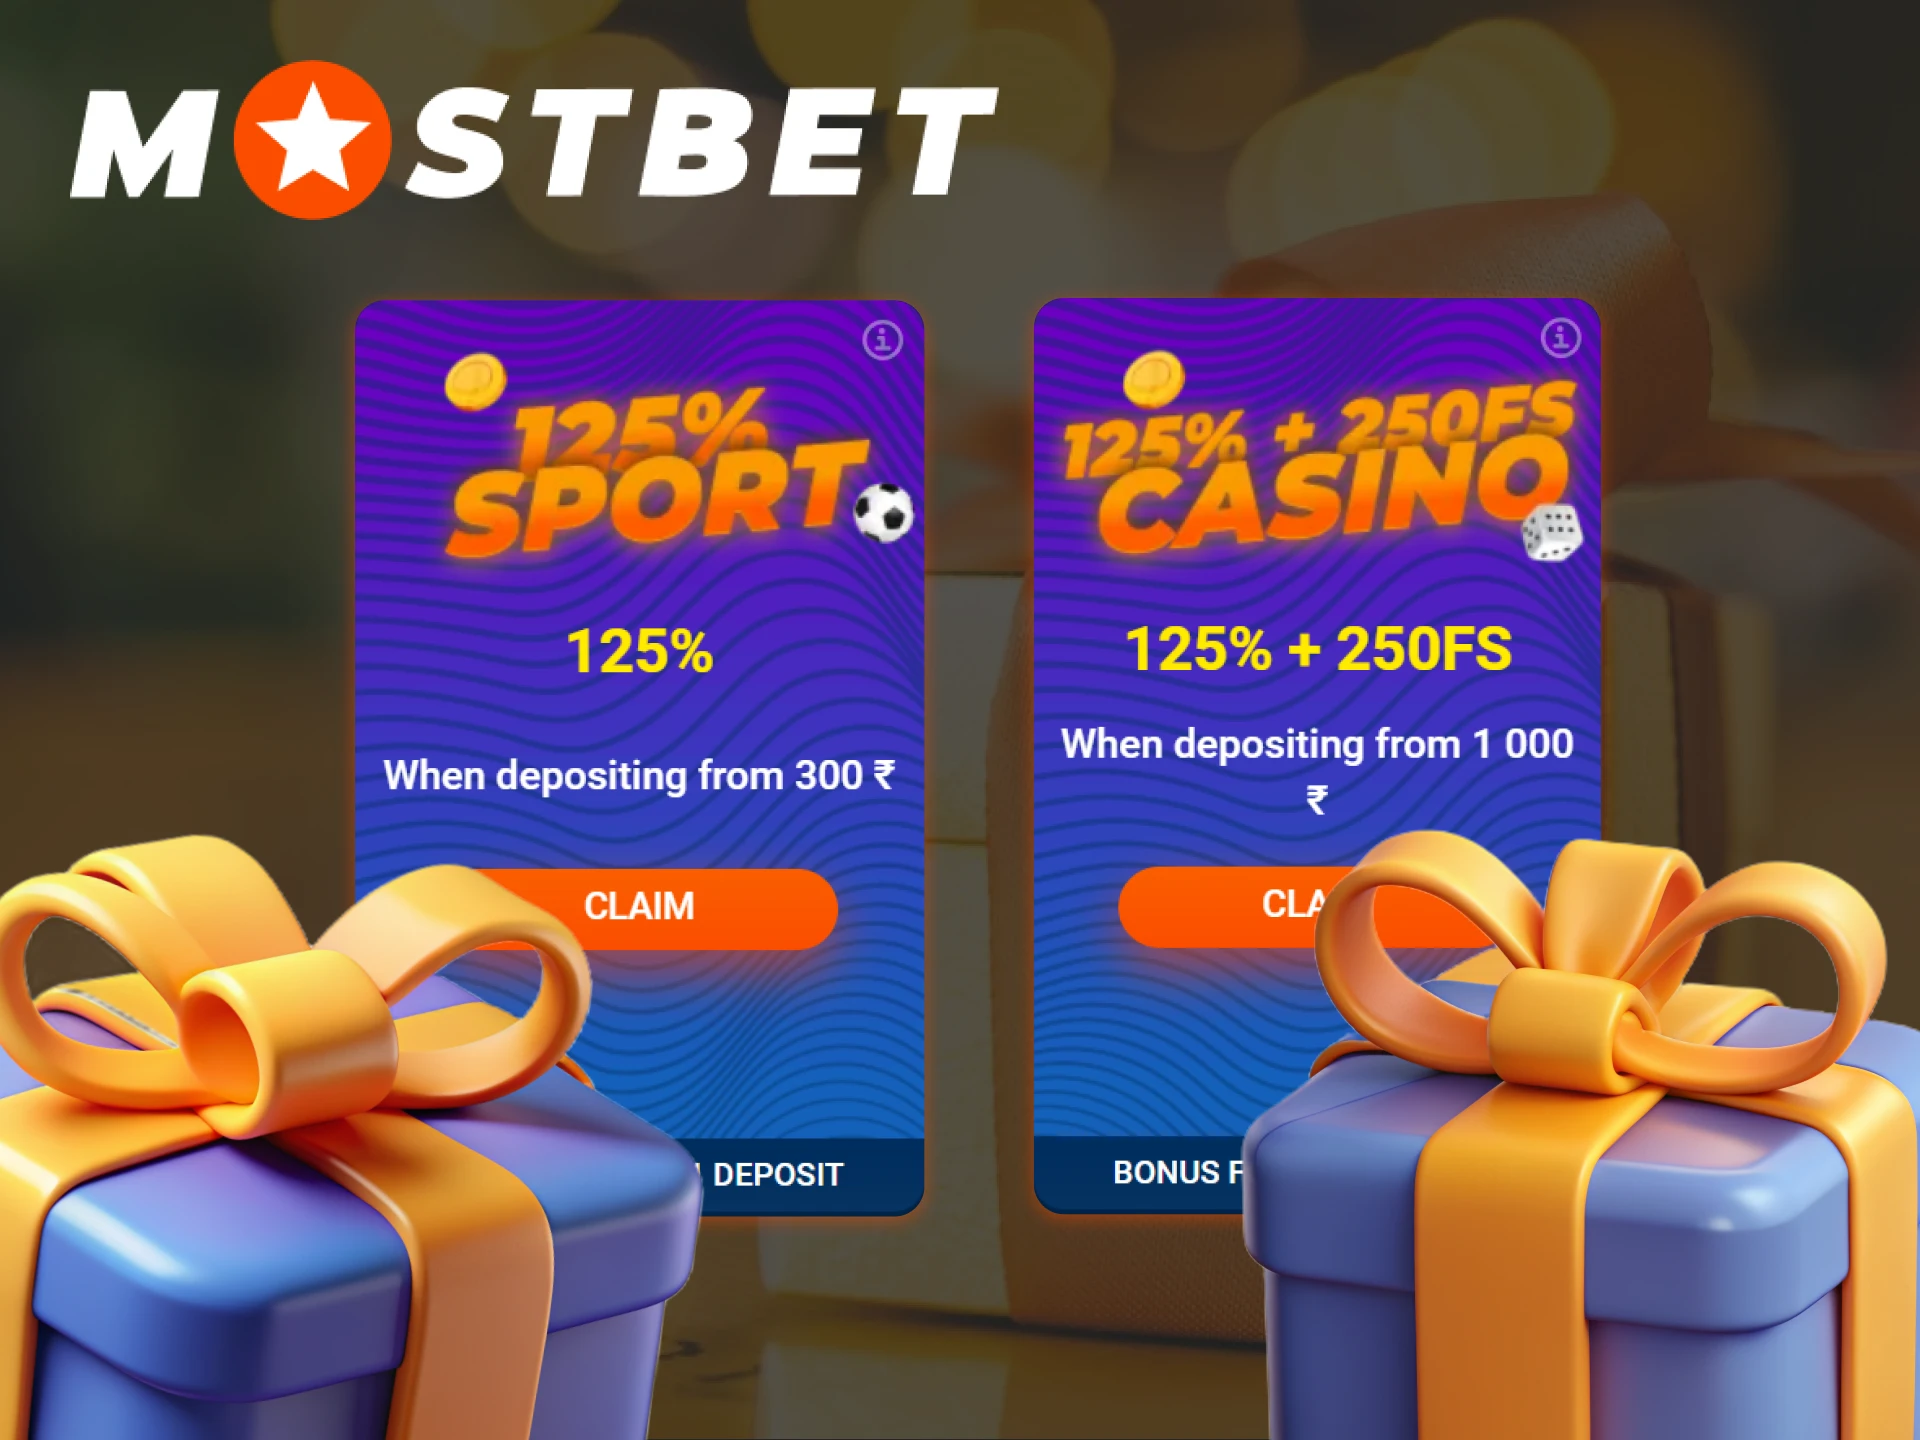 Create an account with Mostbet and receive a lucrative sports or casino bonus.